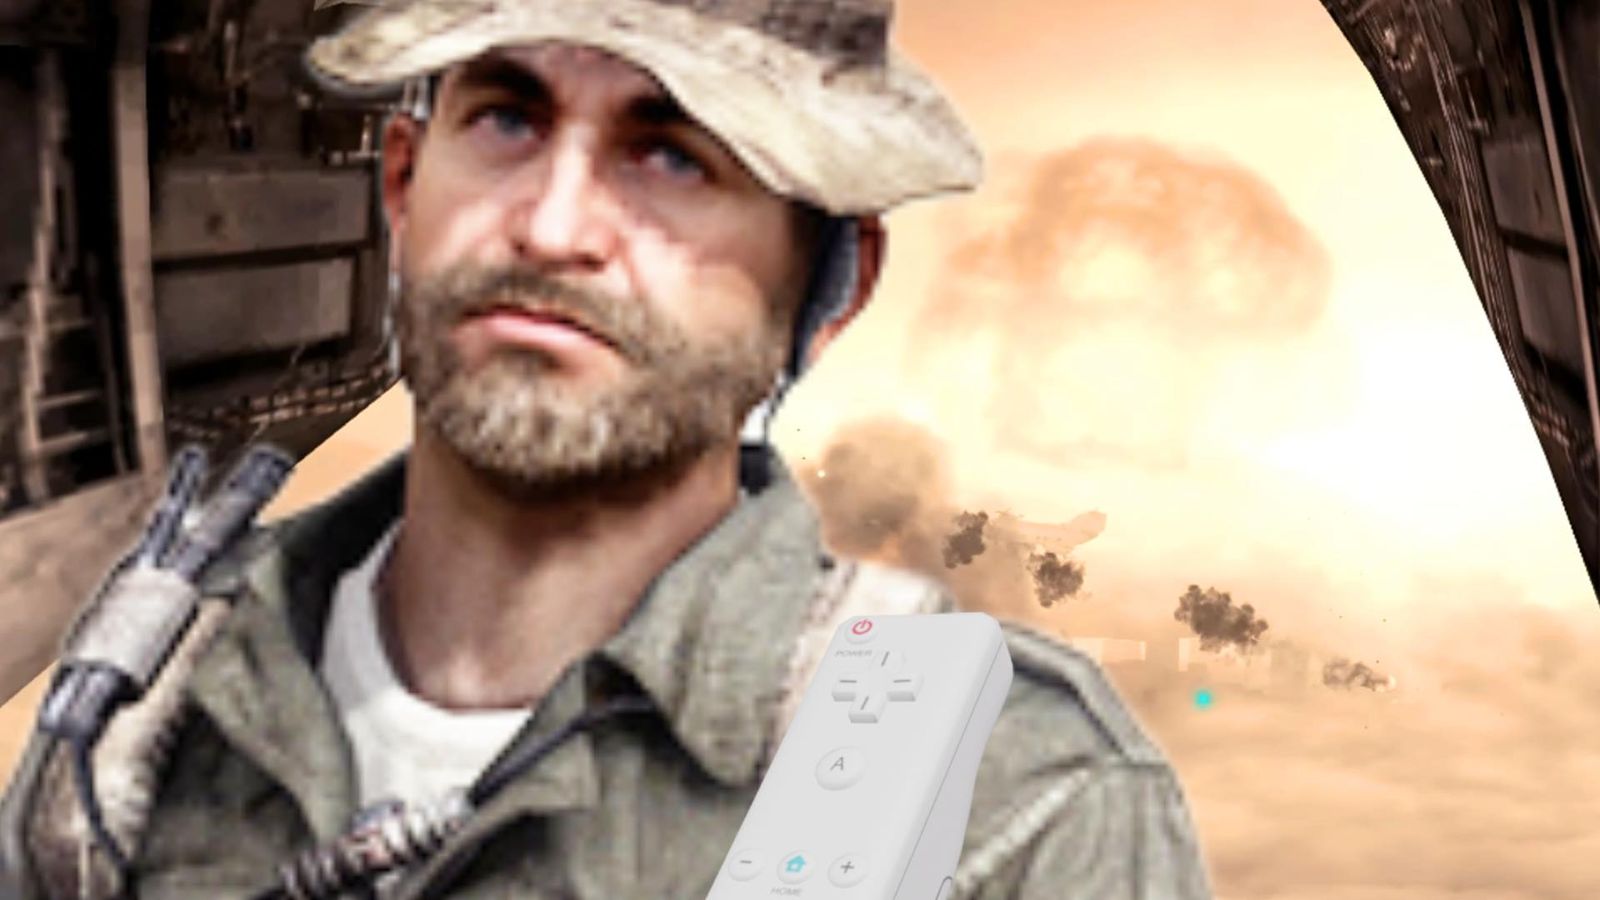 Call of Duty Wii servers go KIA after a decade of service - Captain Price on top of the Nuke scene from Modern Warfare Reflex on the Nintendo Wii